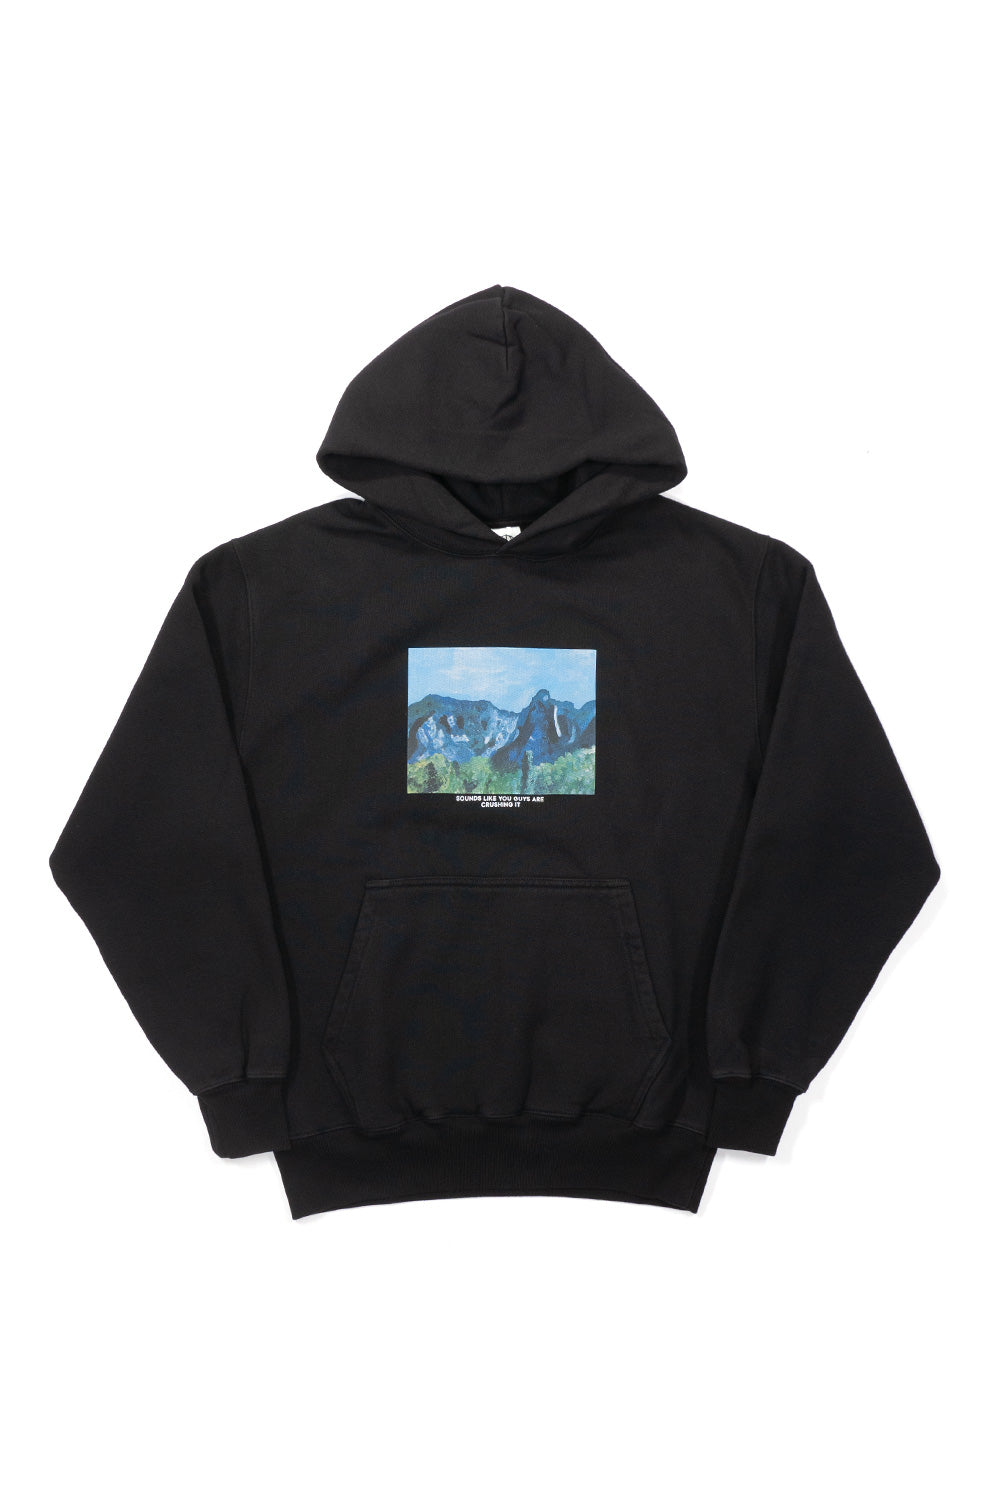 Polar Skate Co. Sounds Like You Guys Are Crushing It Hoodie Black - BONKERS